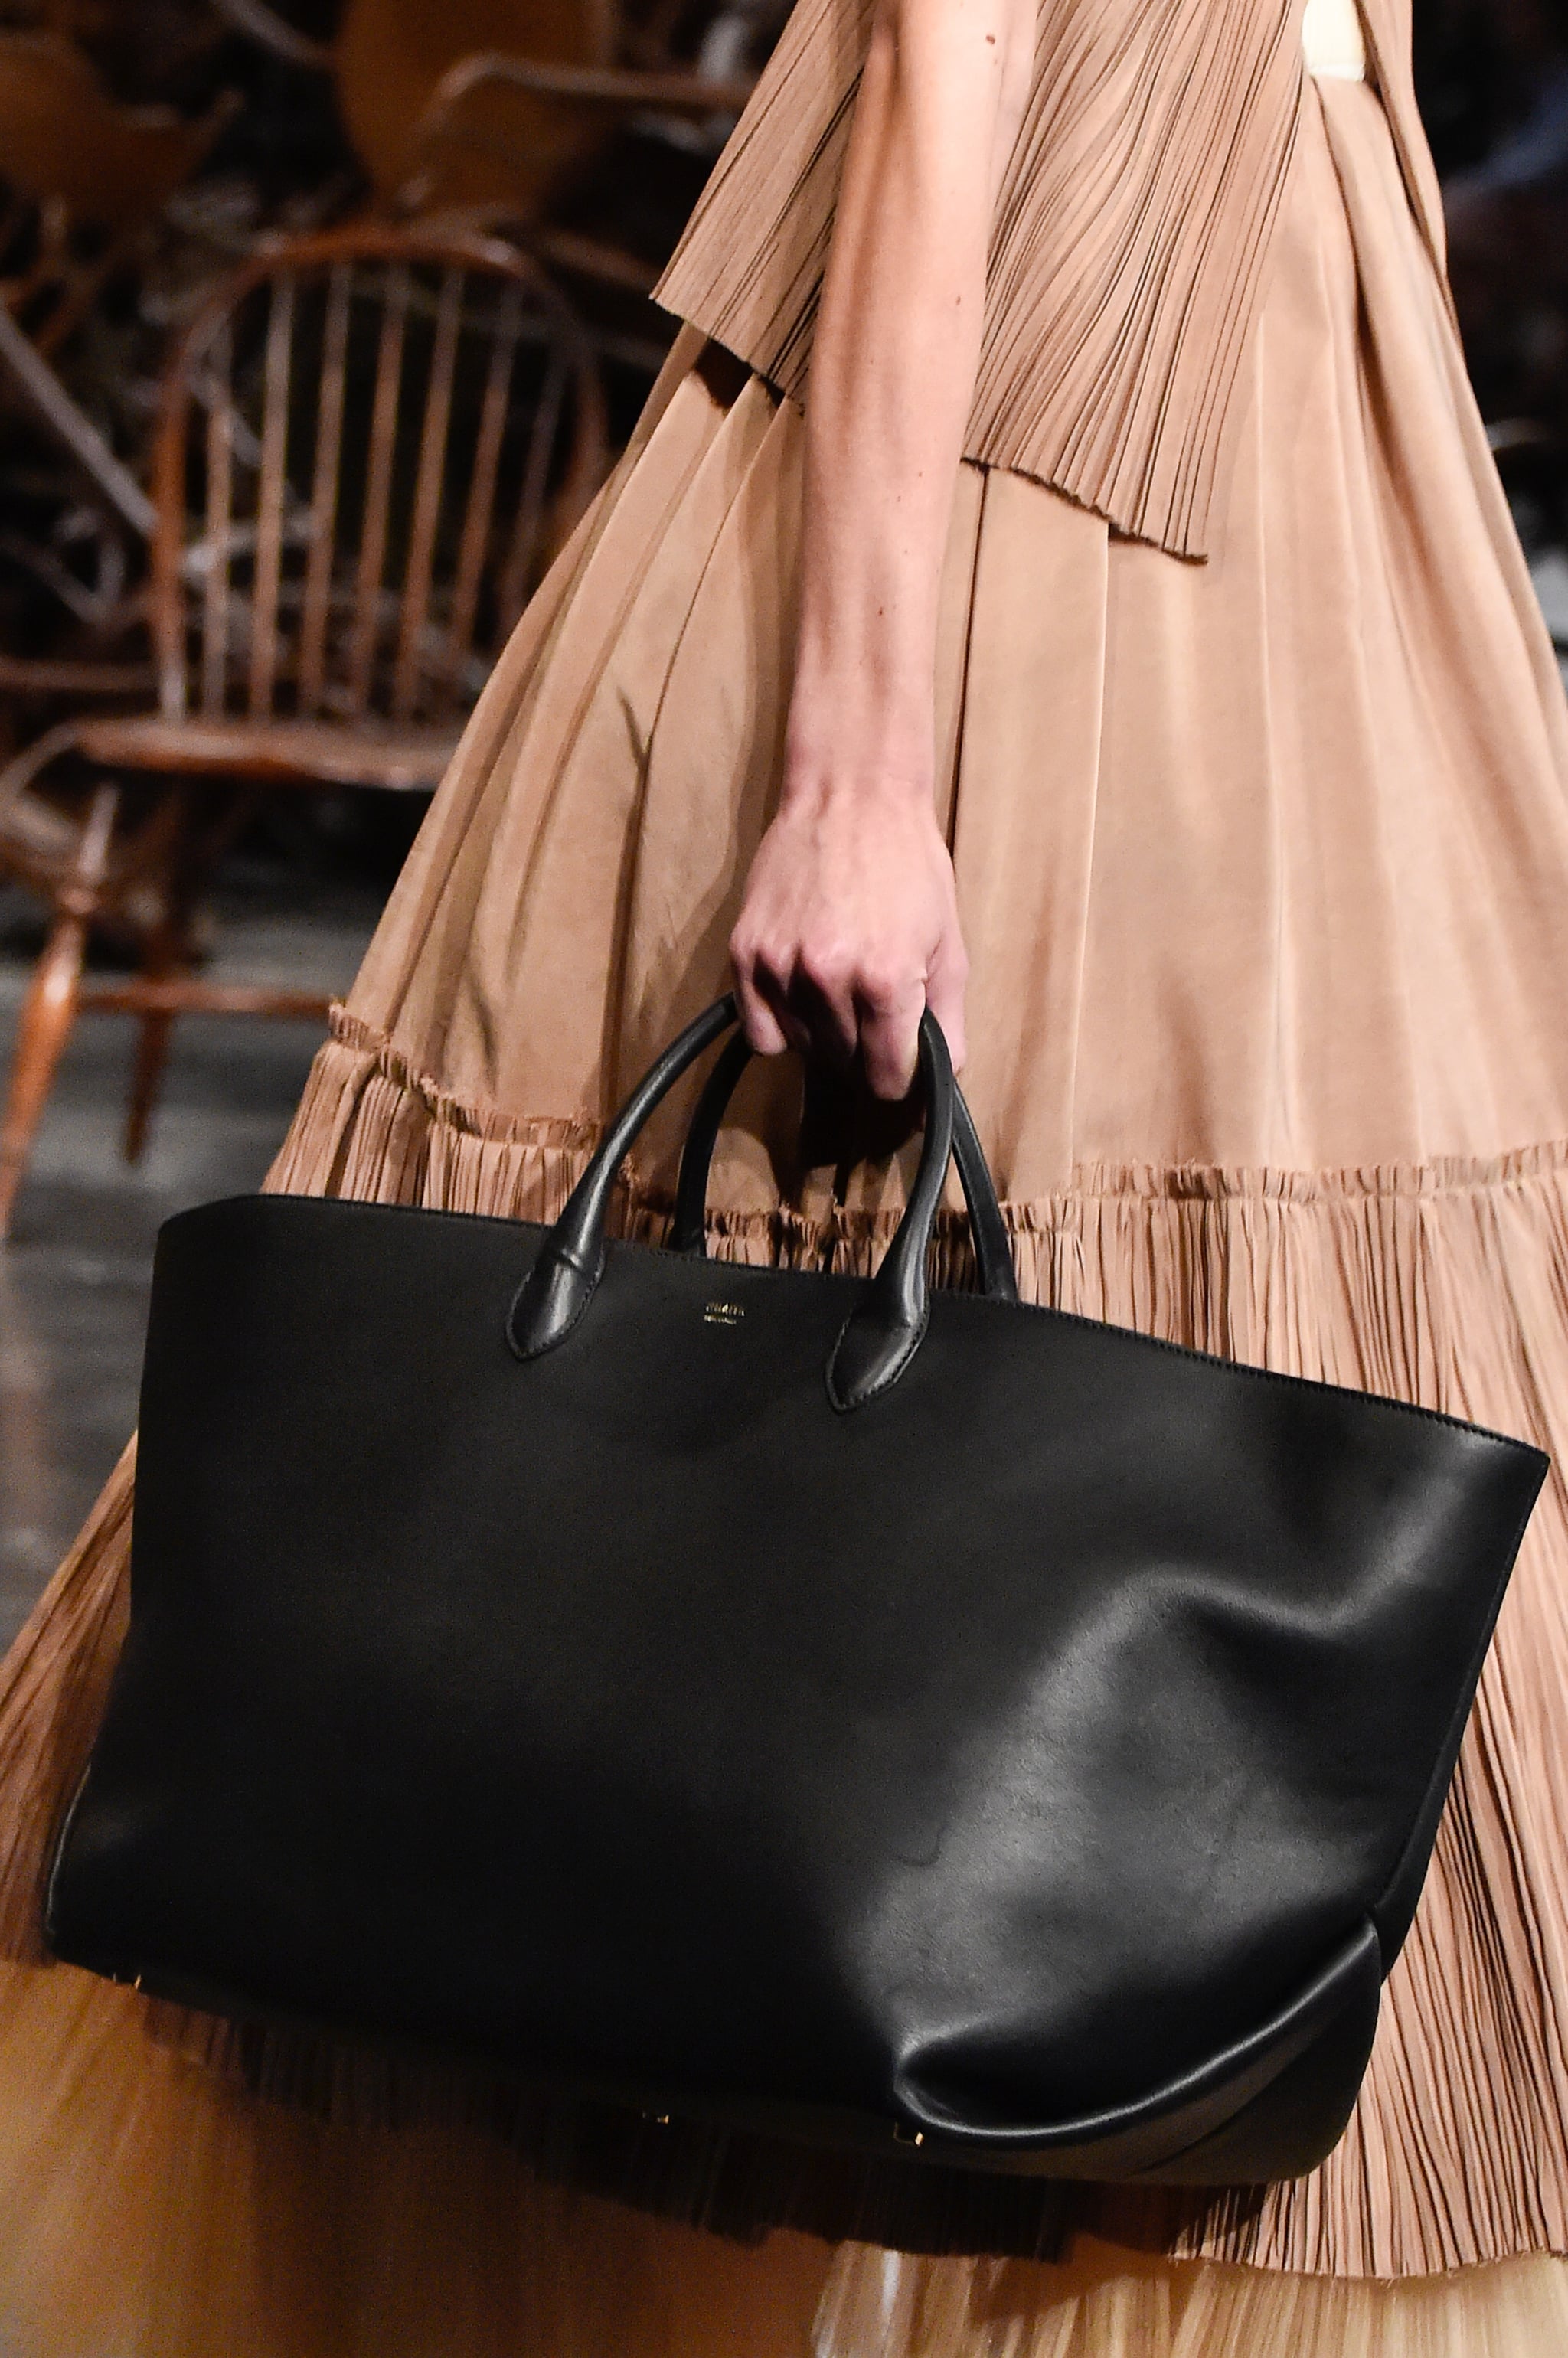 Kate Spade New York, Feast Your Eyes On All The New Bag Trends for Spring  2020